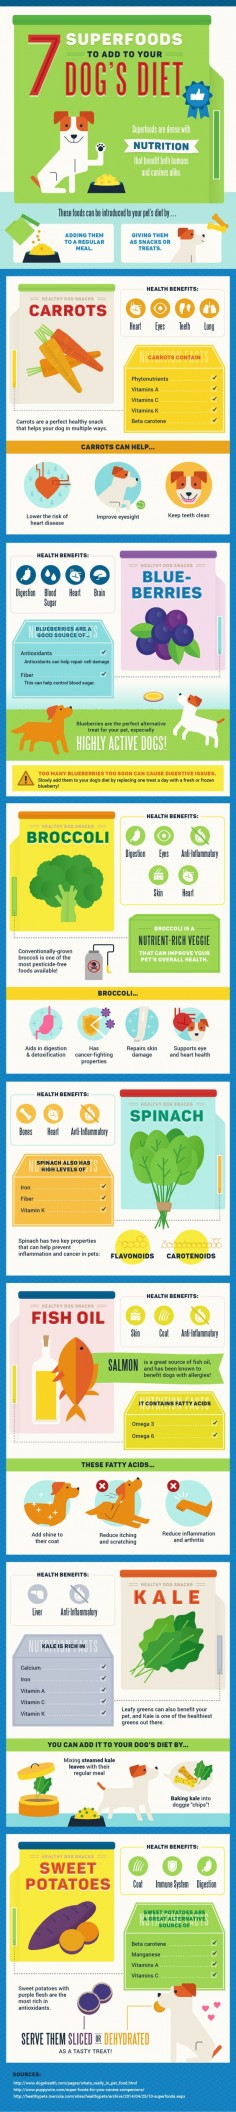 While your dog may enjoy having bacon added to his #dog food every day, your dog's health may suffer, as he doesn't understand that certain types of foods need to be eaten in moderation. To help you select the ideal add-ins for your dog, this #infographic explains both the benefits of Superfoods and which you may want your pup to try!